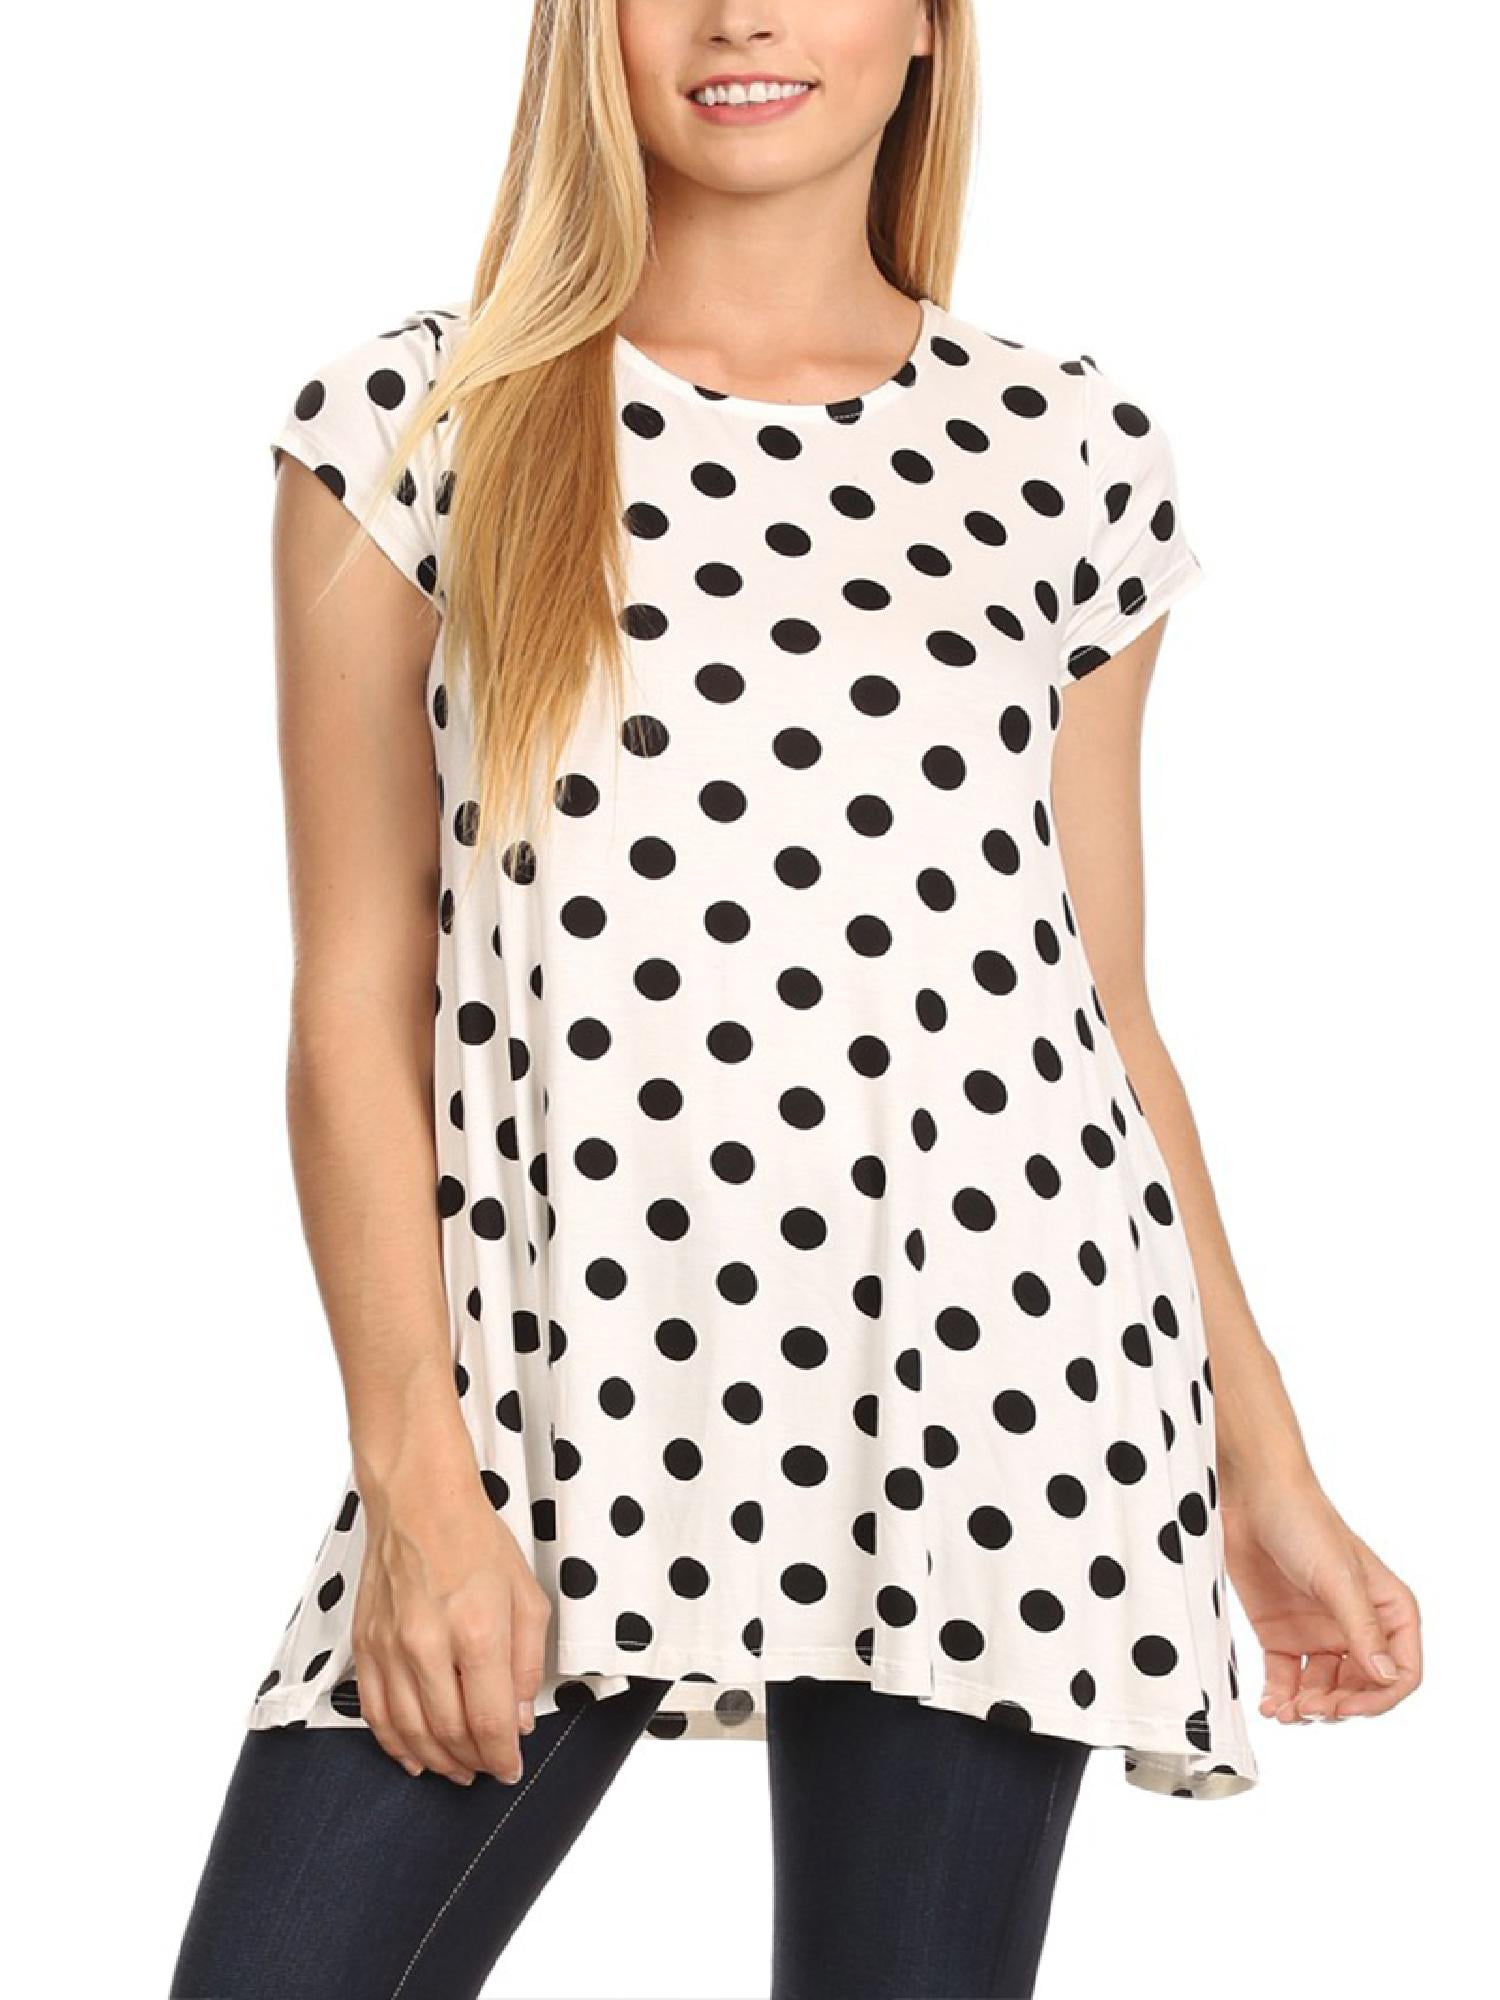 Womens Relaxed Fit Short Sleeve Polka Dot Round Neck Casual Pockets Blouse Tee Top